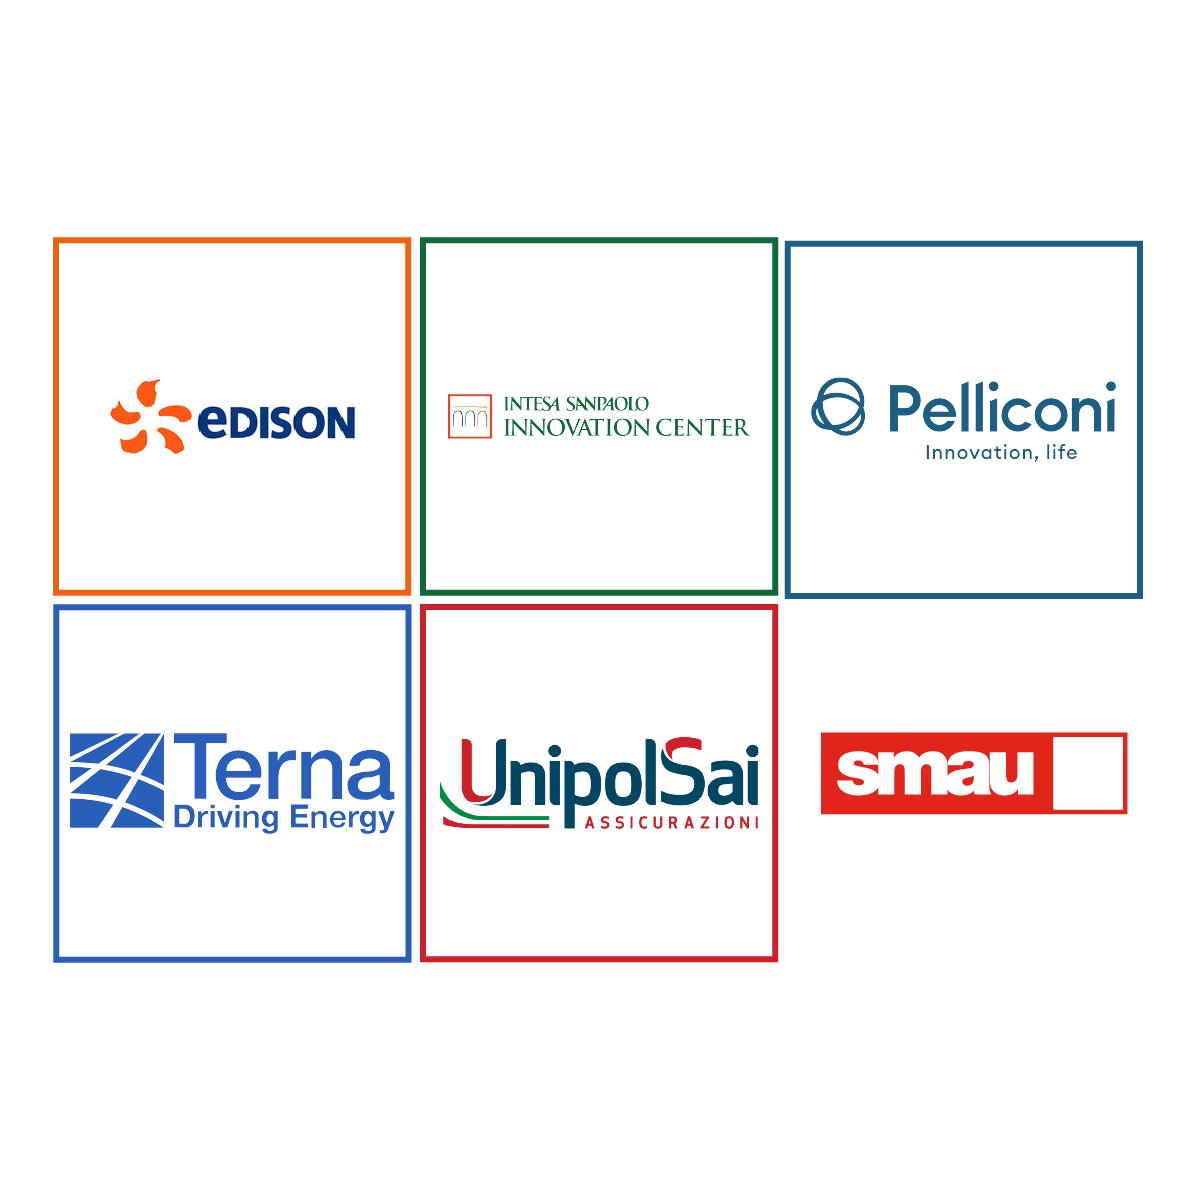 Big companies need innovation! During SMAU San Francisco on May 21st at @innovitsf, there will be Italian corporates interested in meeting startups active on specific business needs with one-to-one meetings. Discover who they are & their business needs: tinyurl.com/CorpBusinessNe…